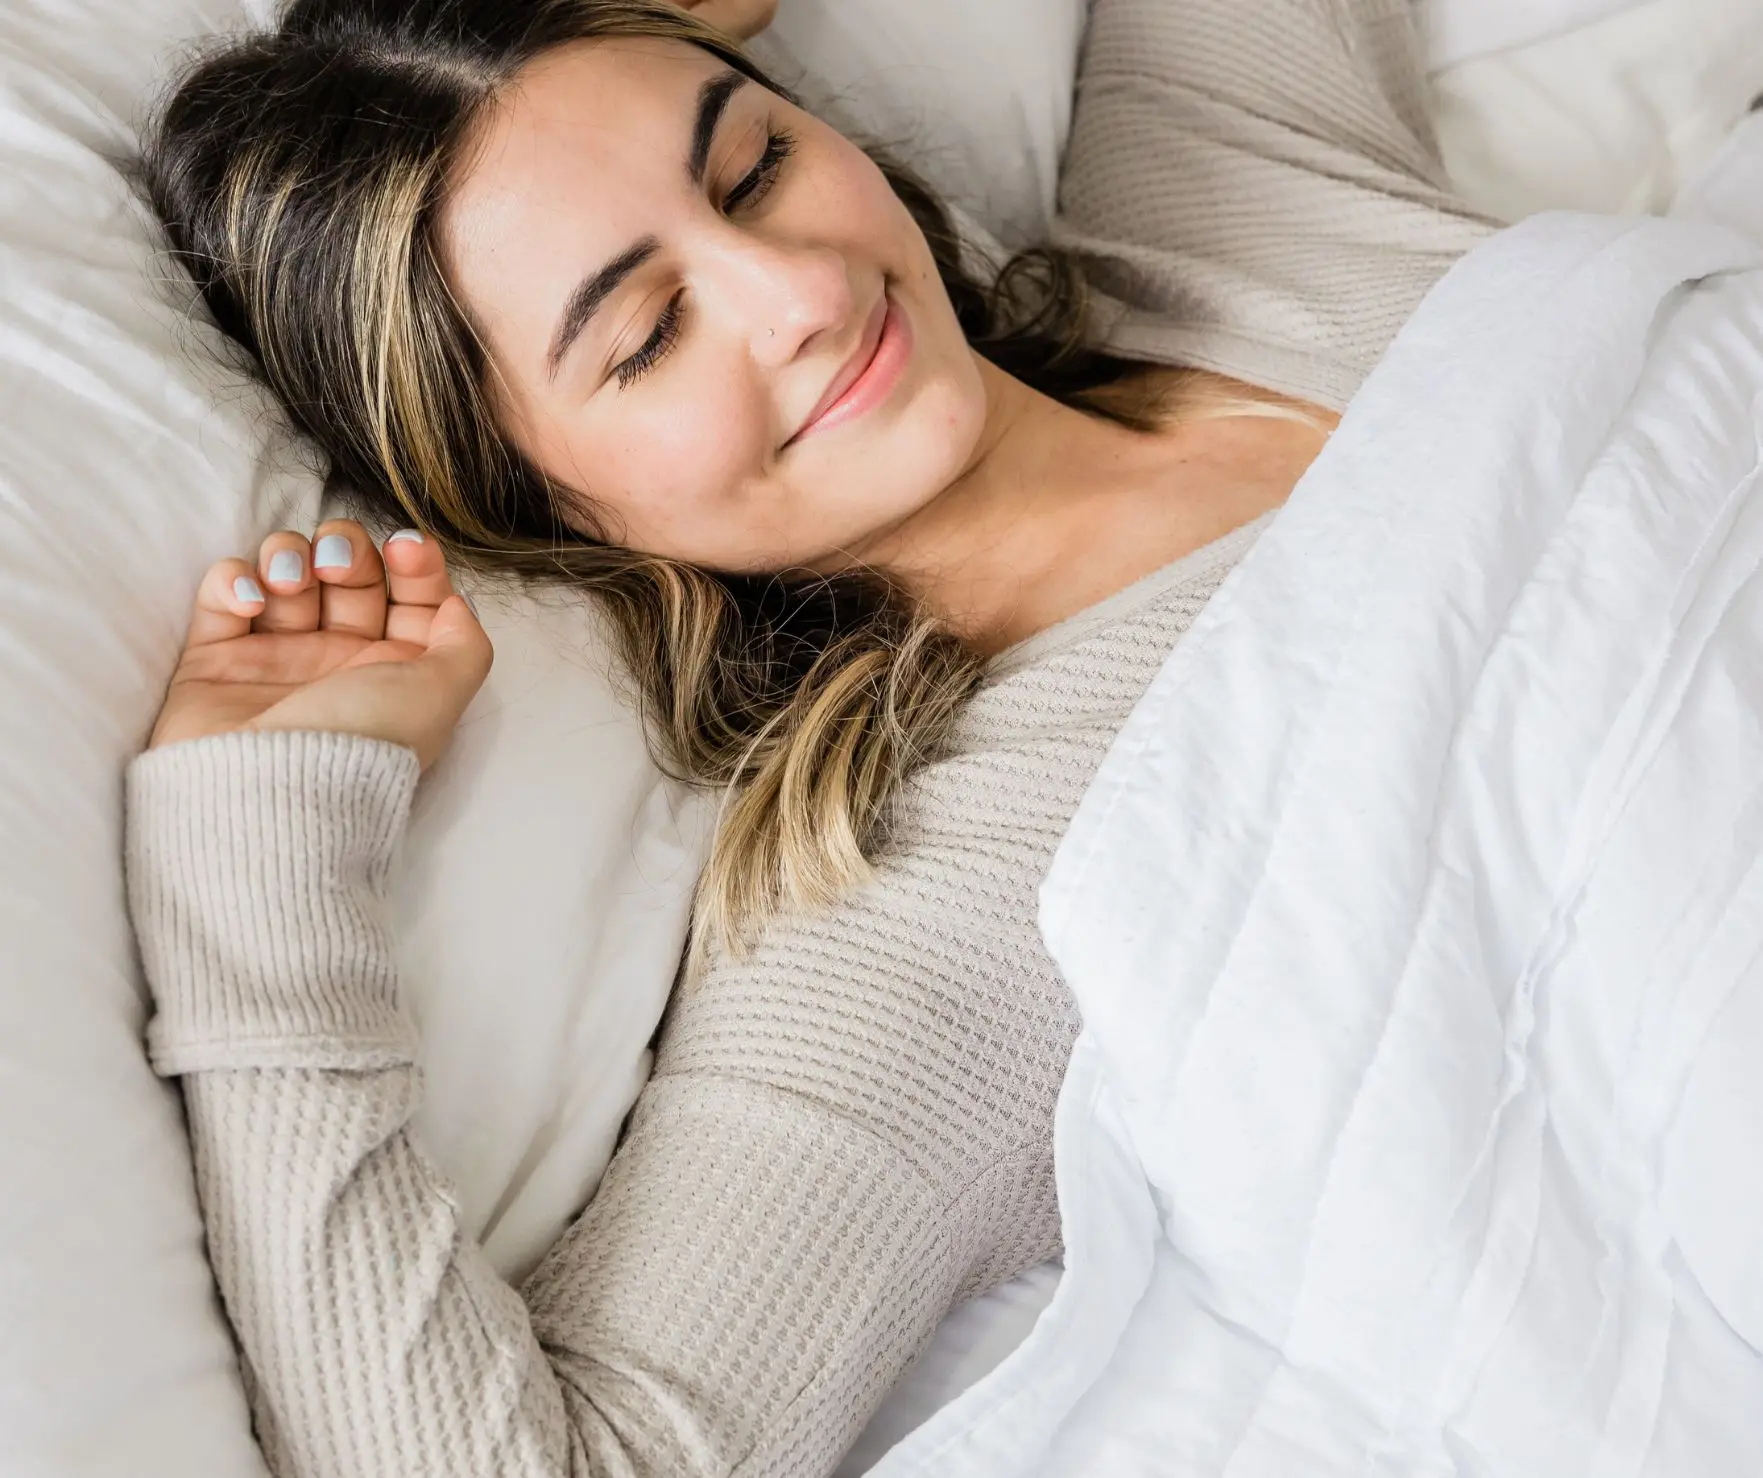 Avoiding these sleep disruptors can help ensure that your body and mind are primed for rest.